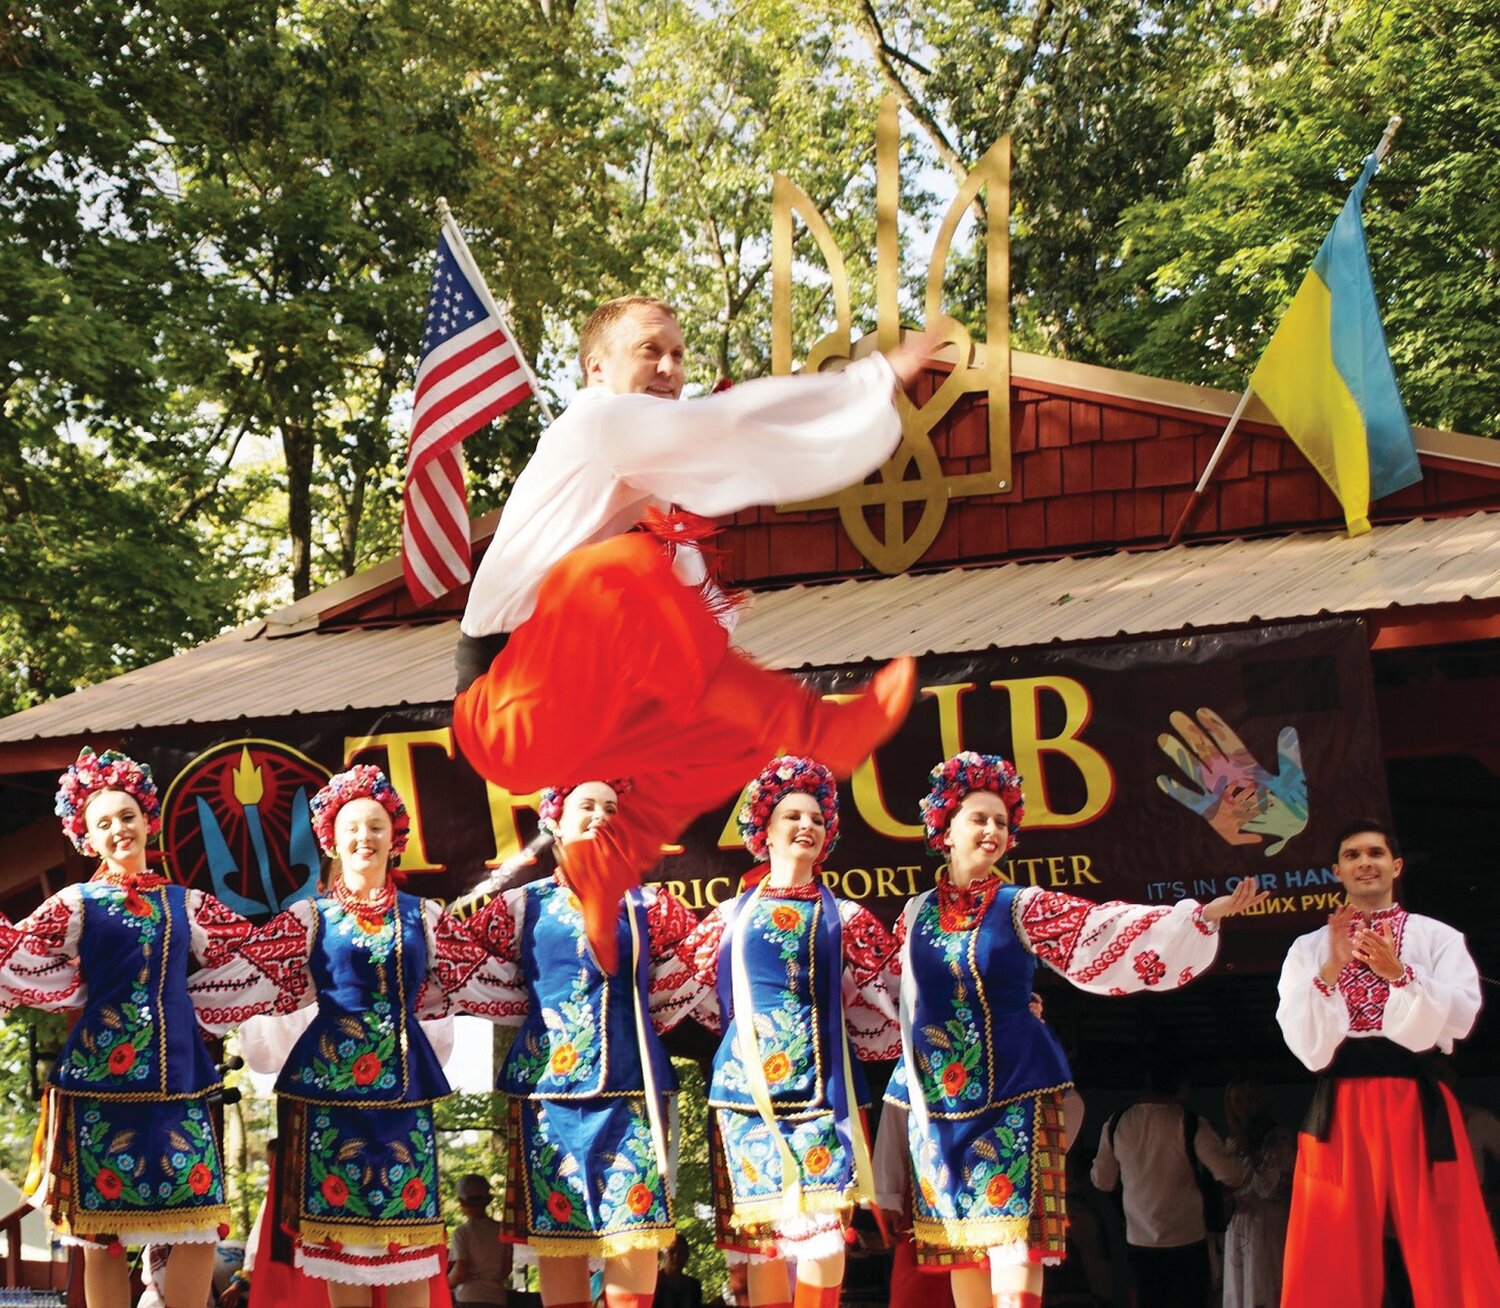 “HOPAK” ethnic dance is among the entertainment at the Ukrainian Folk Festival slated for Aug. 27. A portion of admissions will benefit humanitarian relief of victims of war in Ukraine.